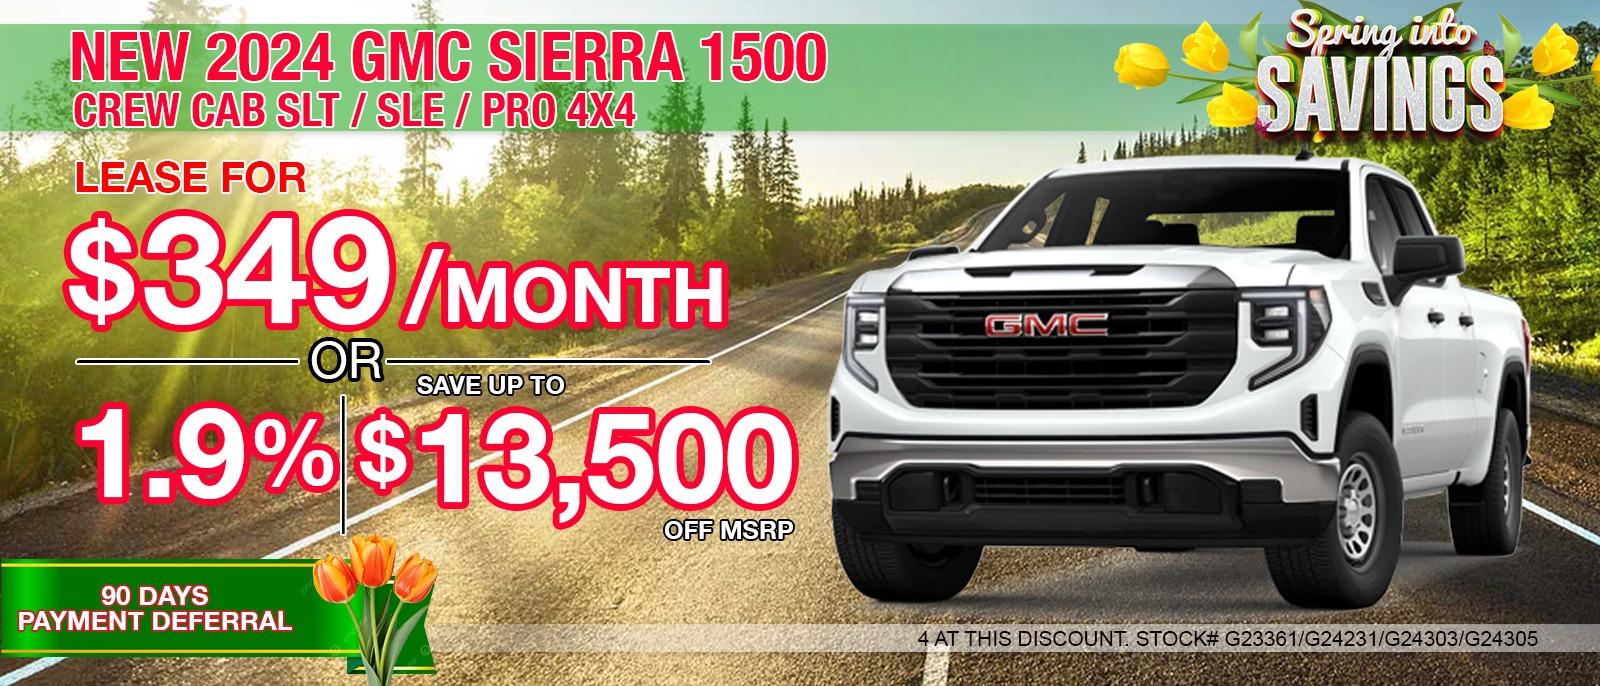 2024 GMC SIERRA 1500 CREW CAB PR0 4X4. Your Net Savings After All Offers save up to $13,500